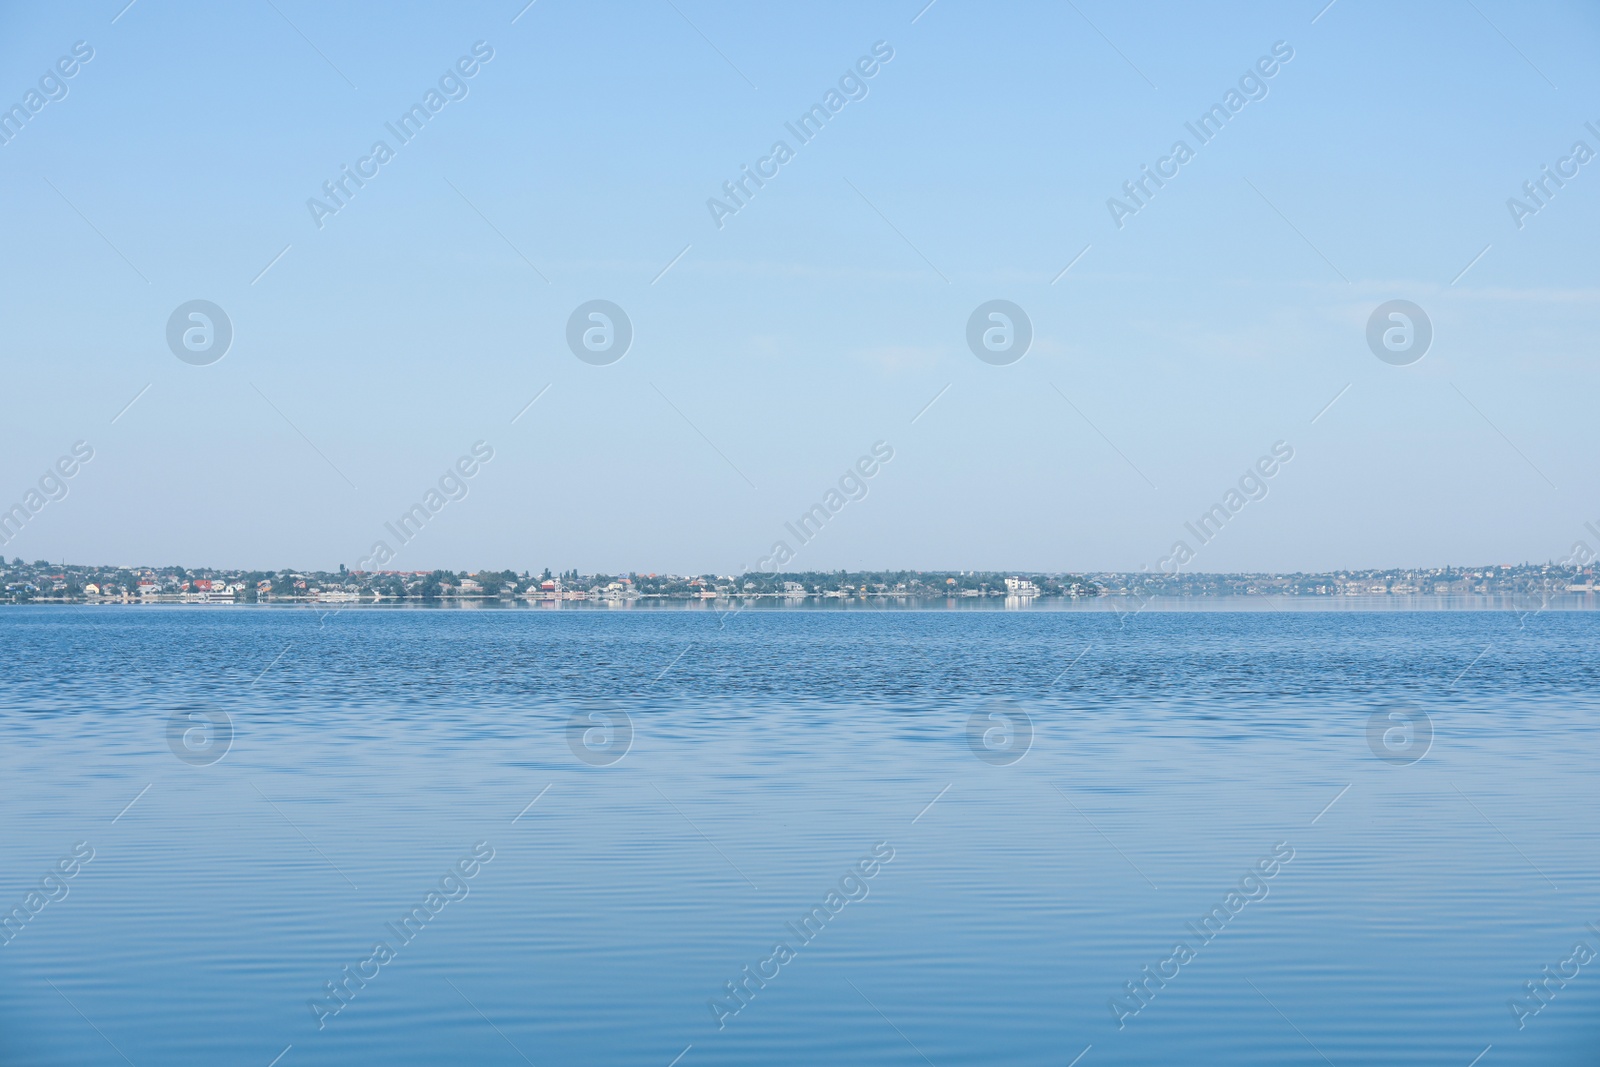 Photo of Picturesque view of calm river under blue sky